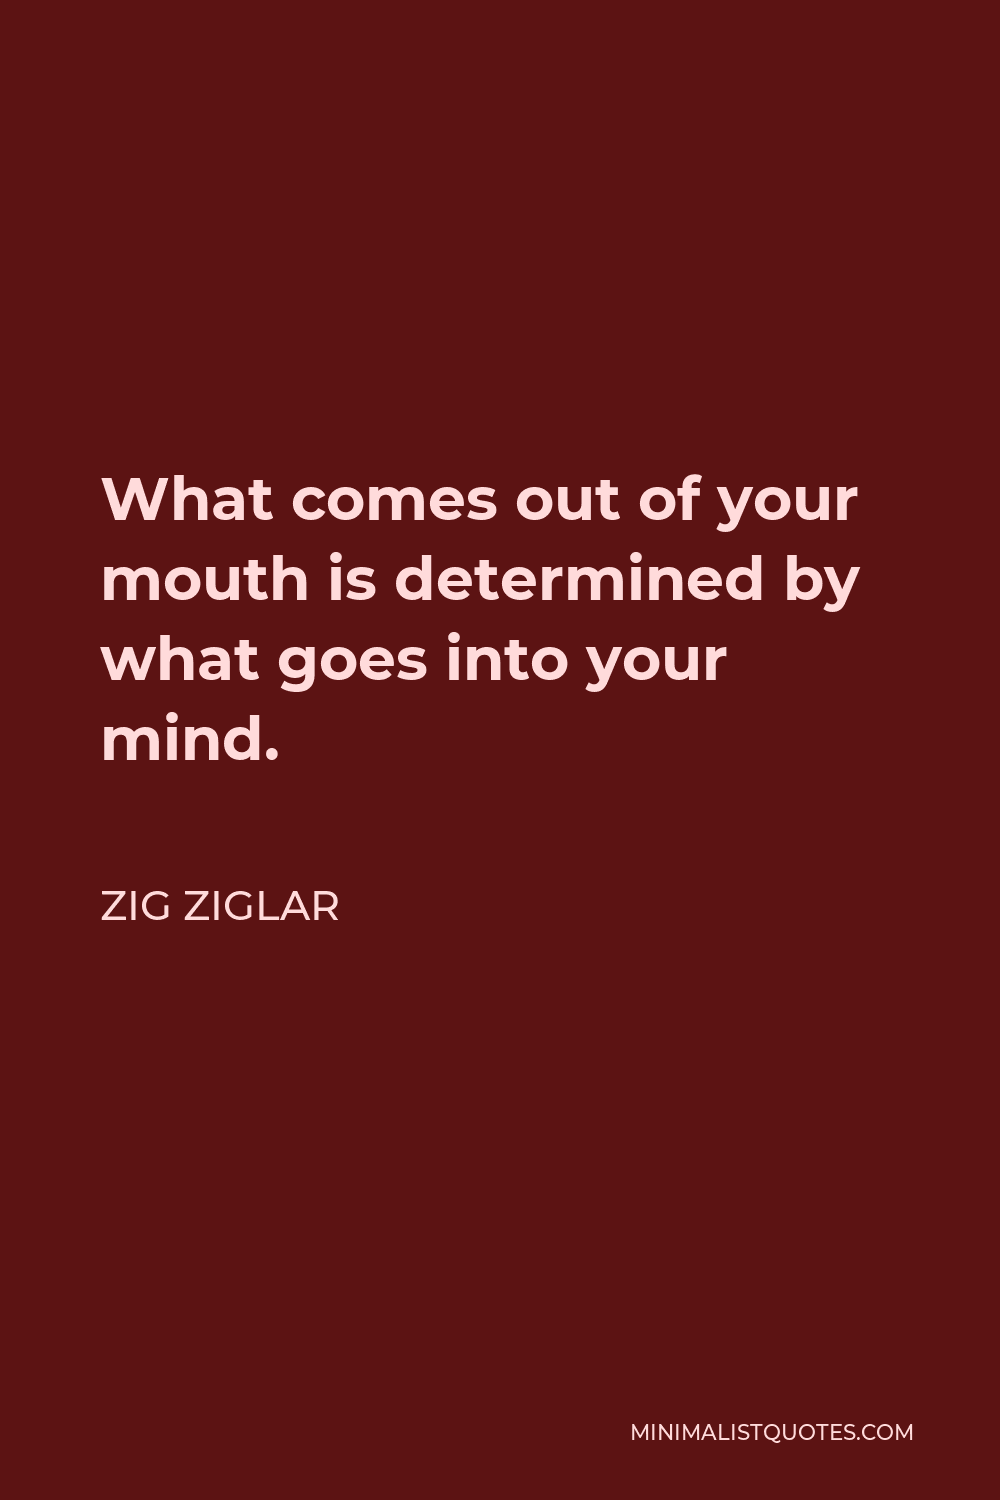 Zig Ziglar Quote - What comes out of your mouth is determined by what goes into your mind.